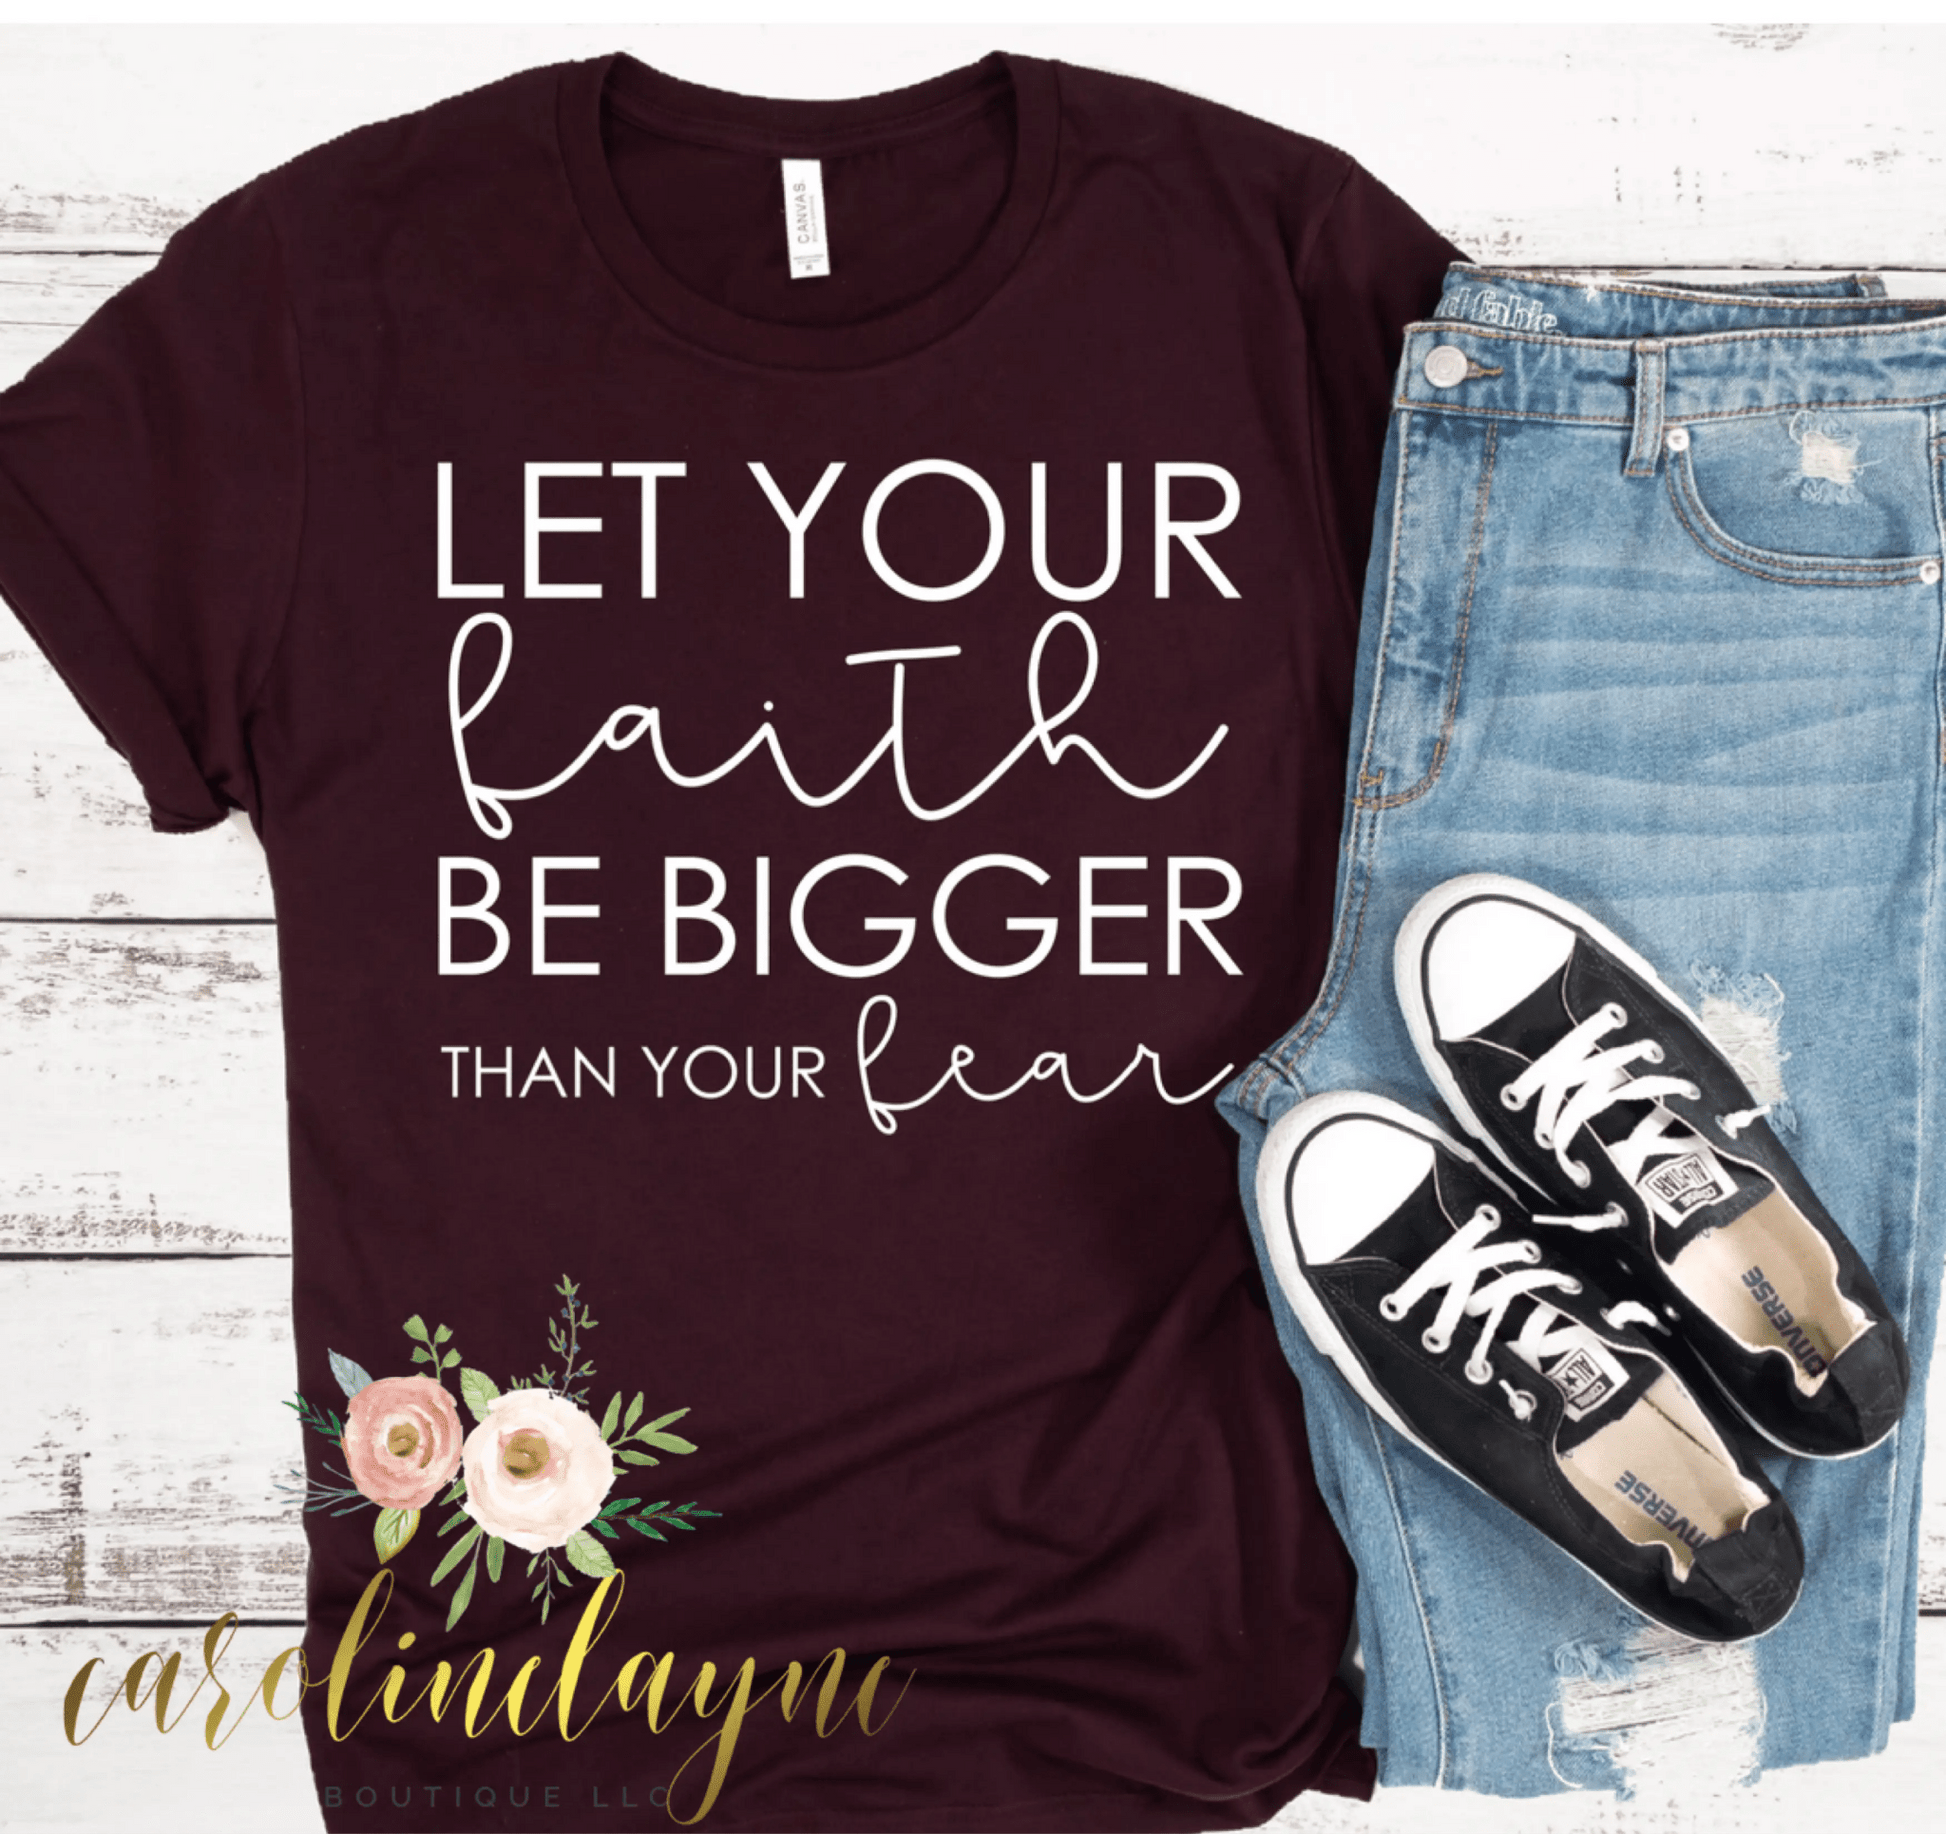 Let your faith be bigger than your fear tee - Caroline Layne Boutique LLC